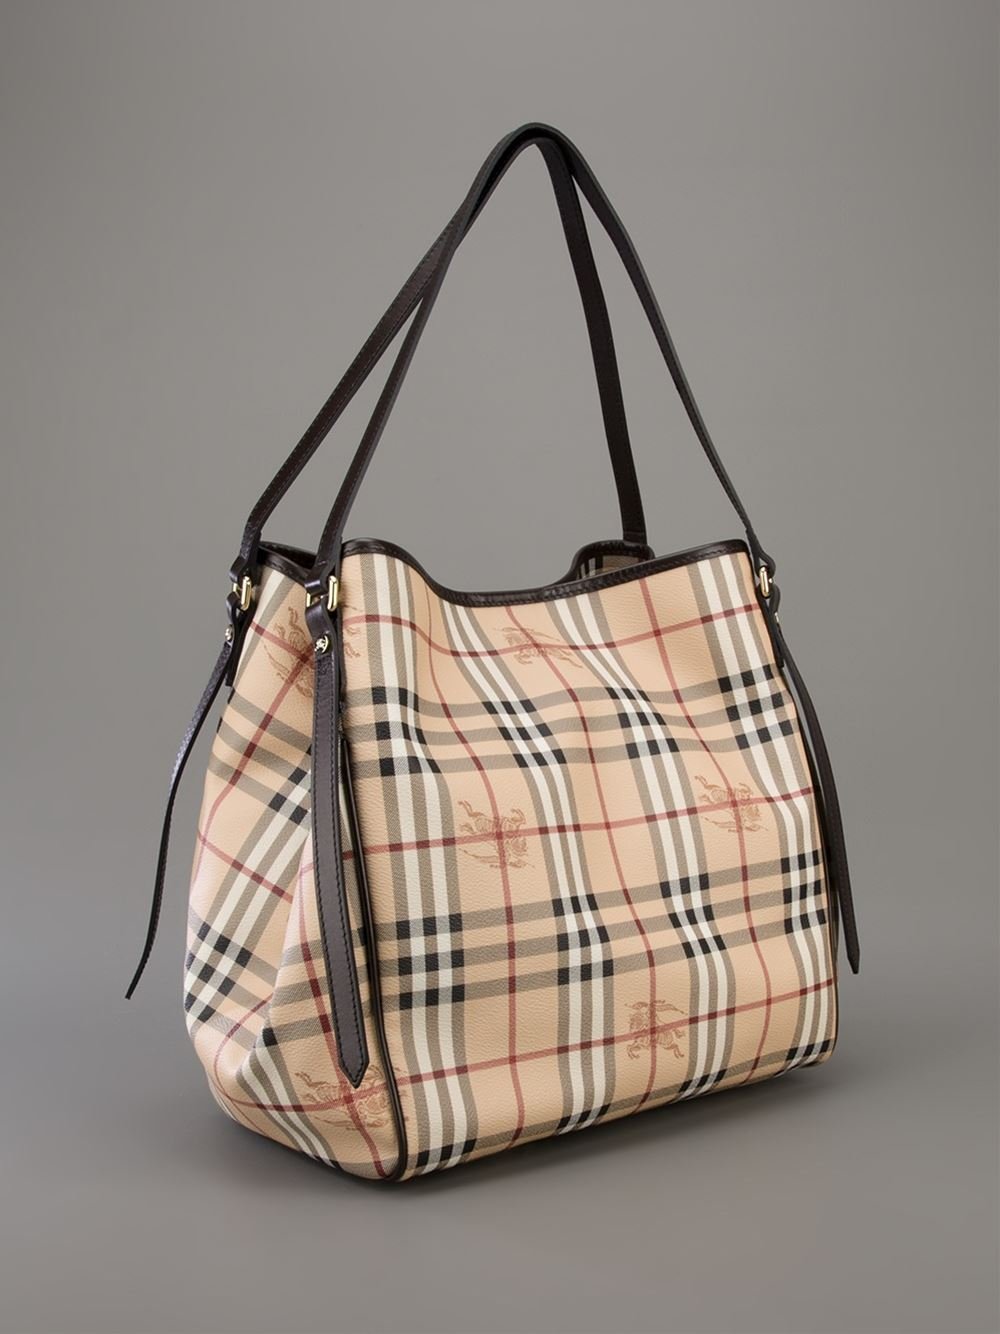 Lyst - Burberry Canterbury Tote Bag in Brown